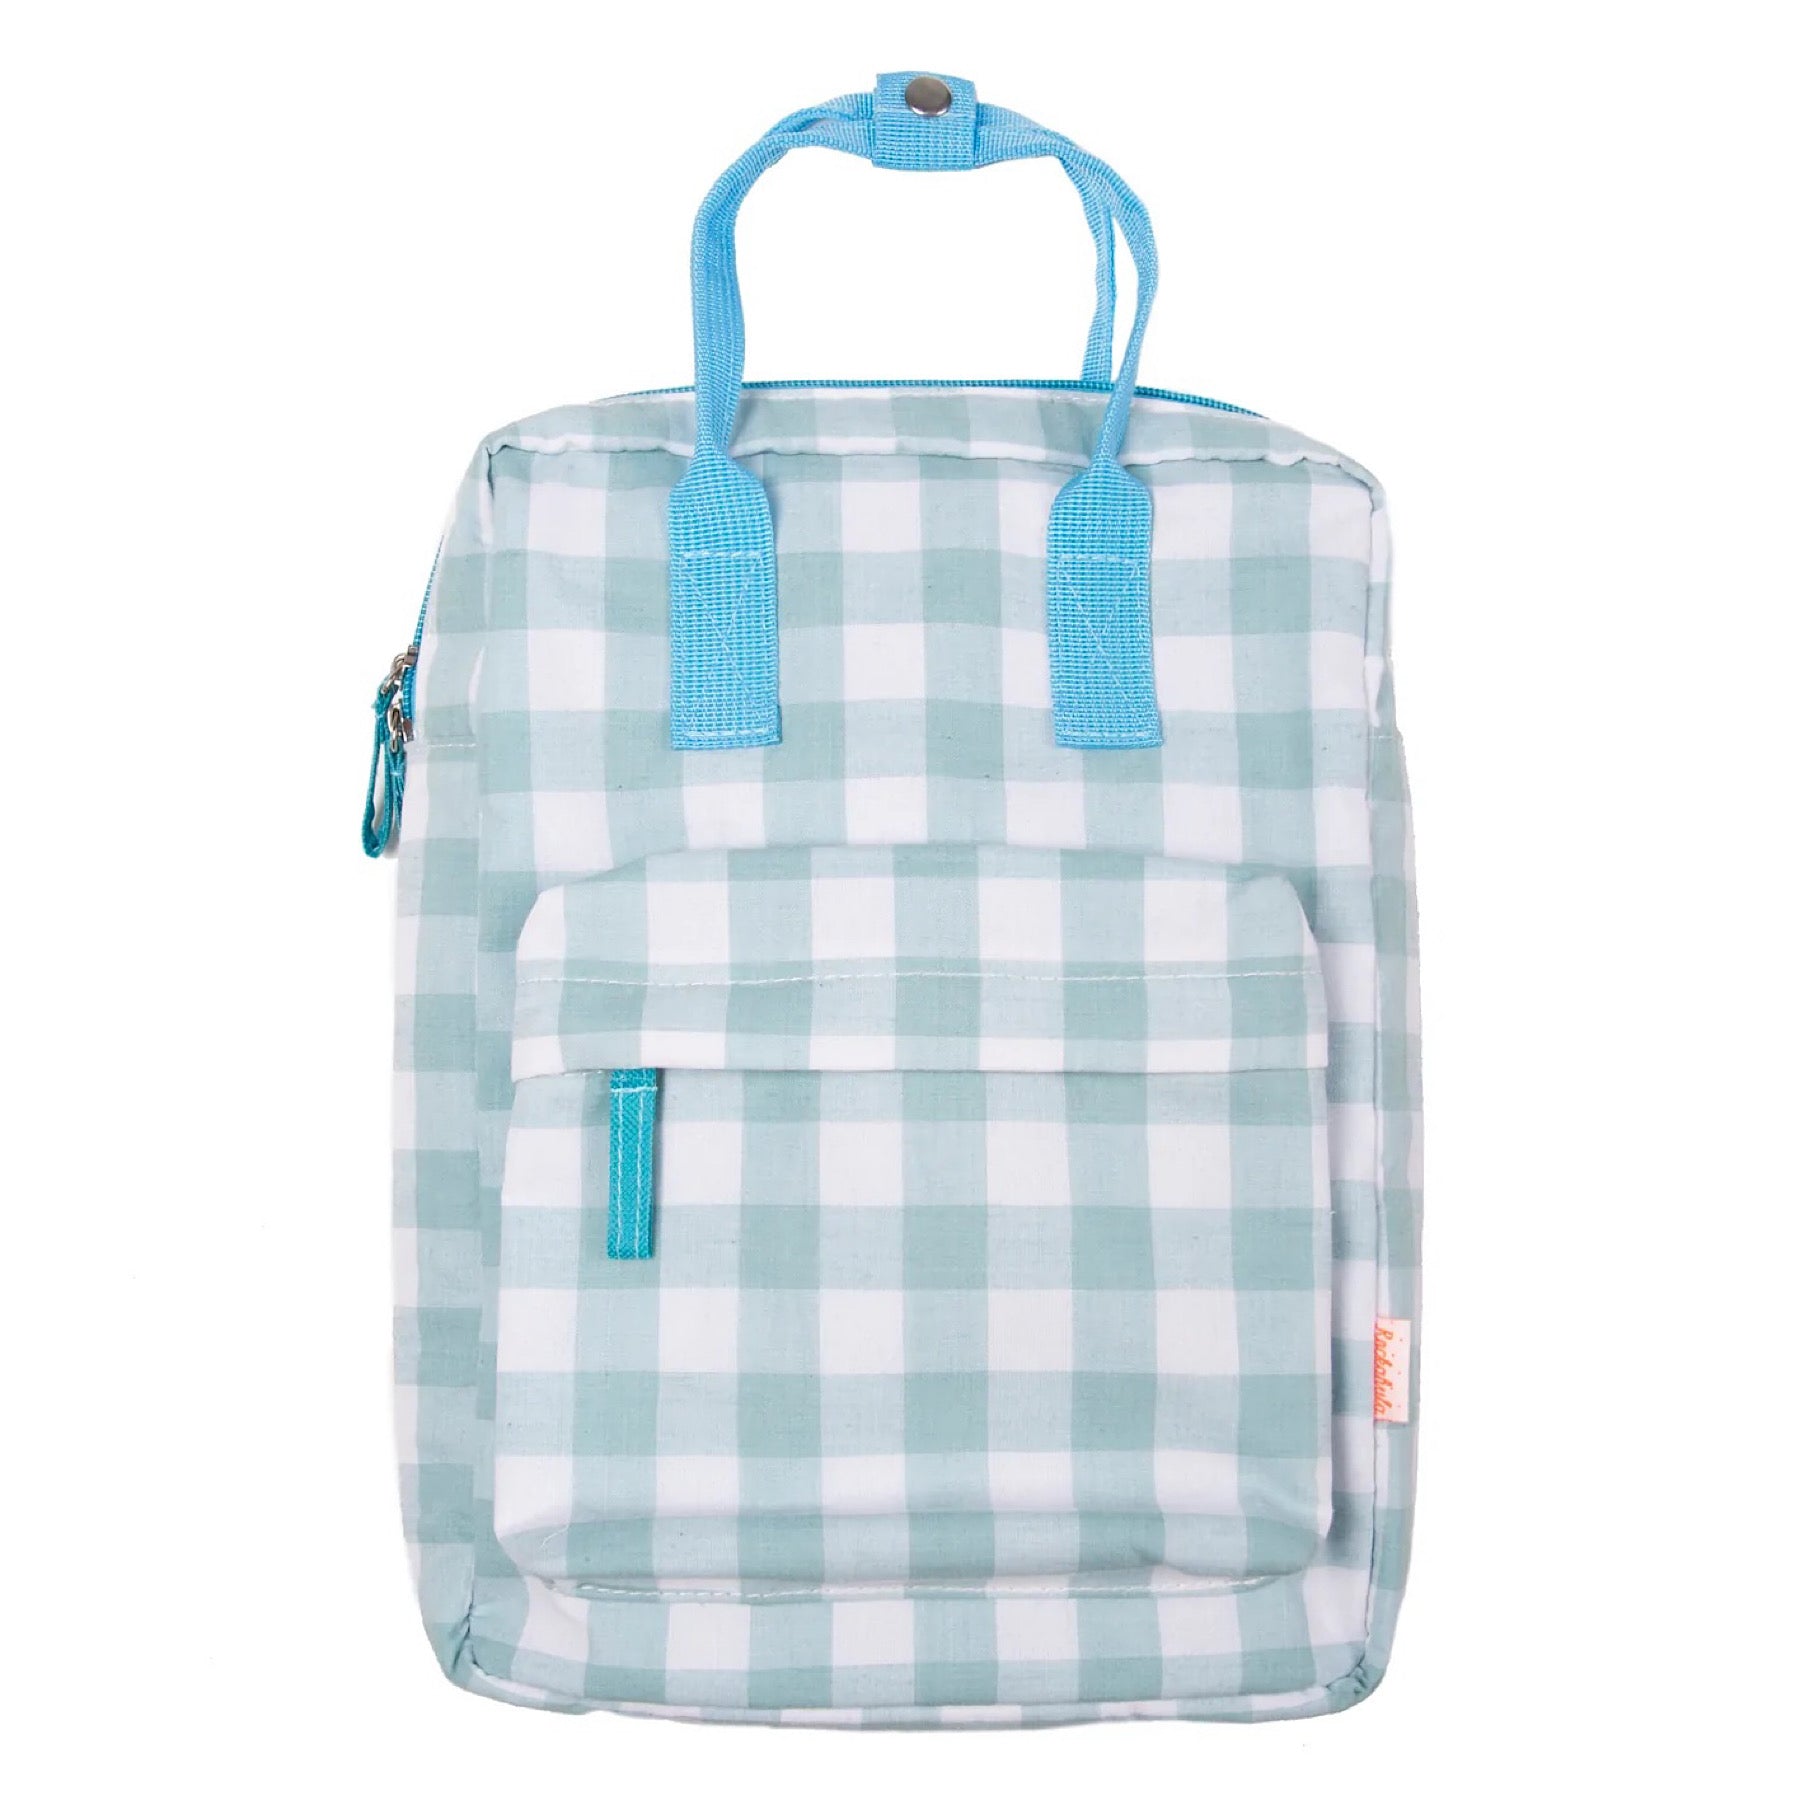 Retro Check Backpack, Green